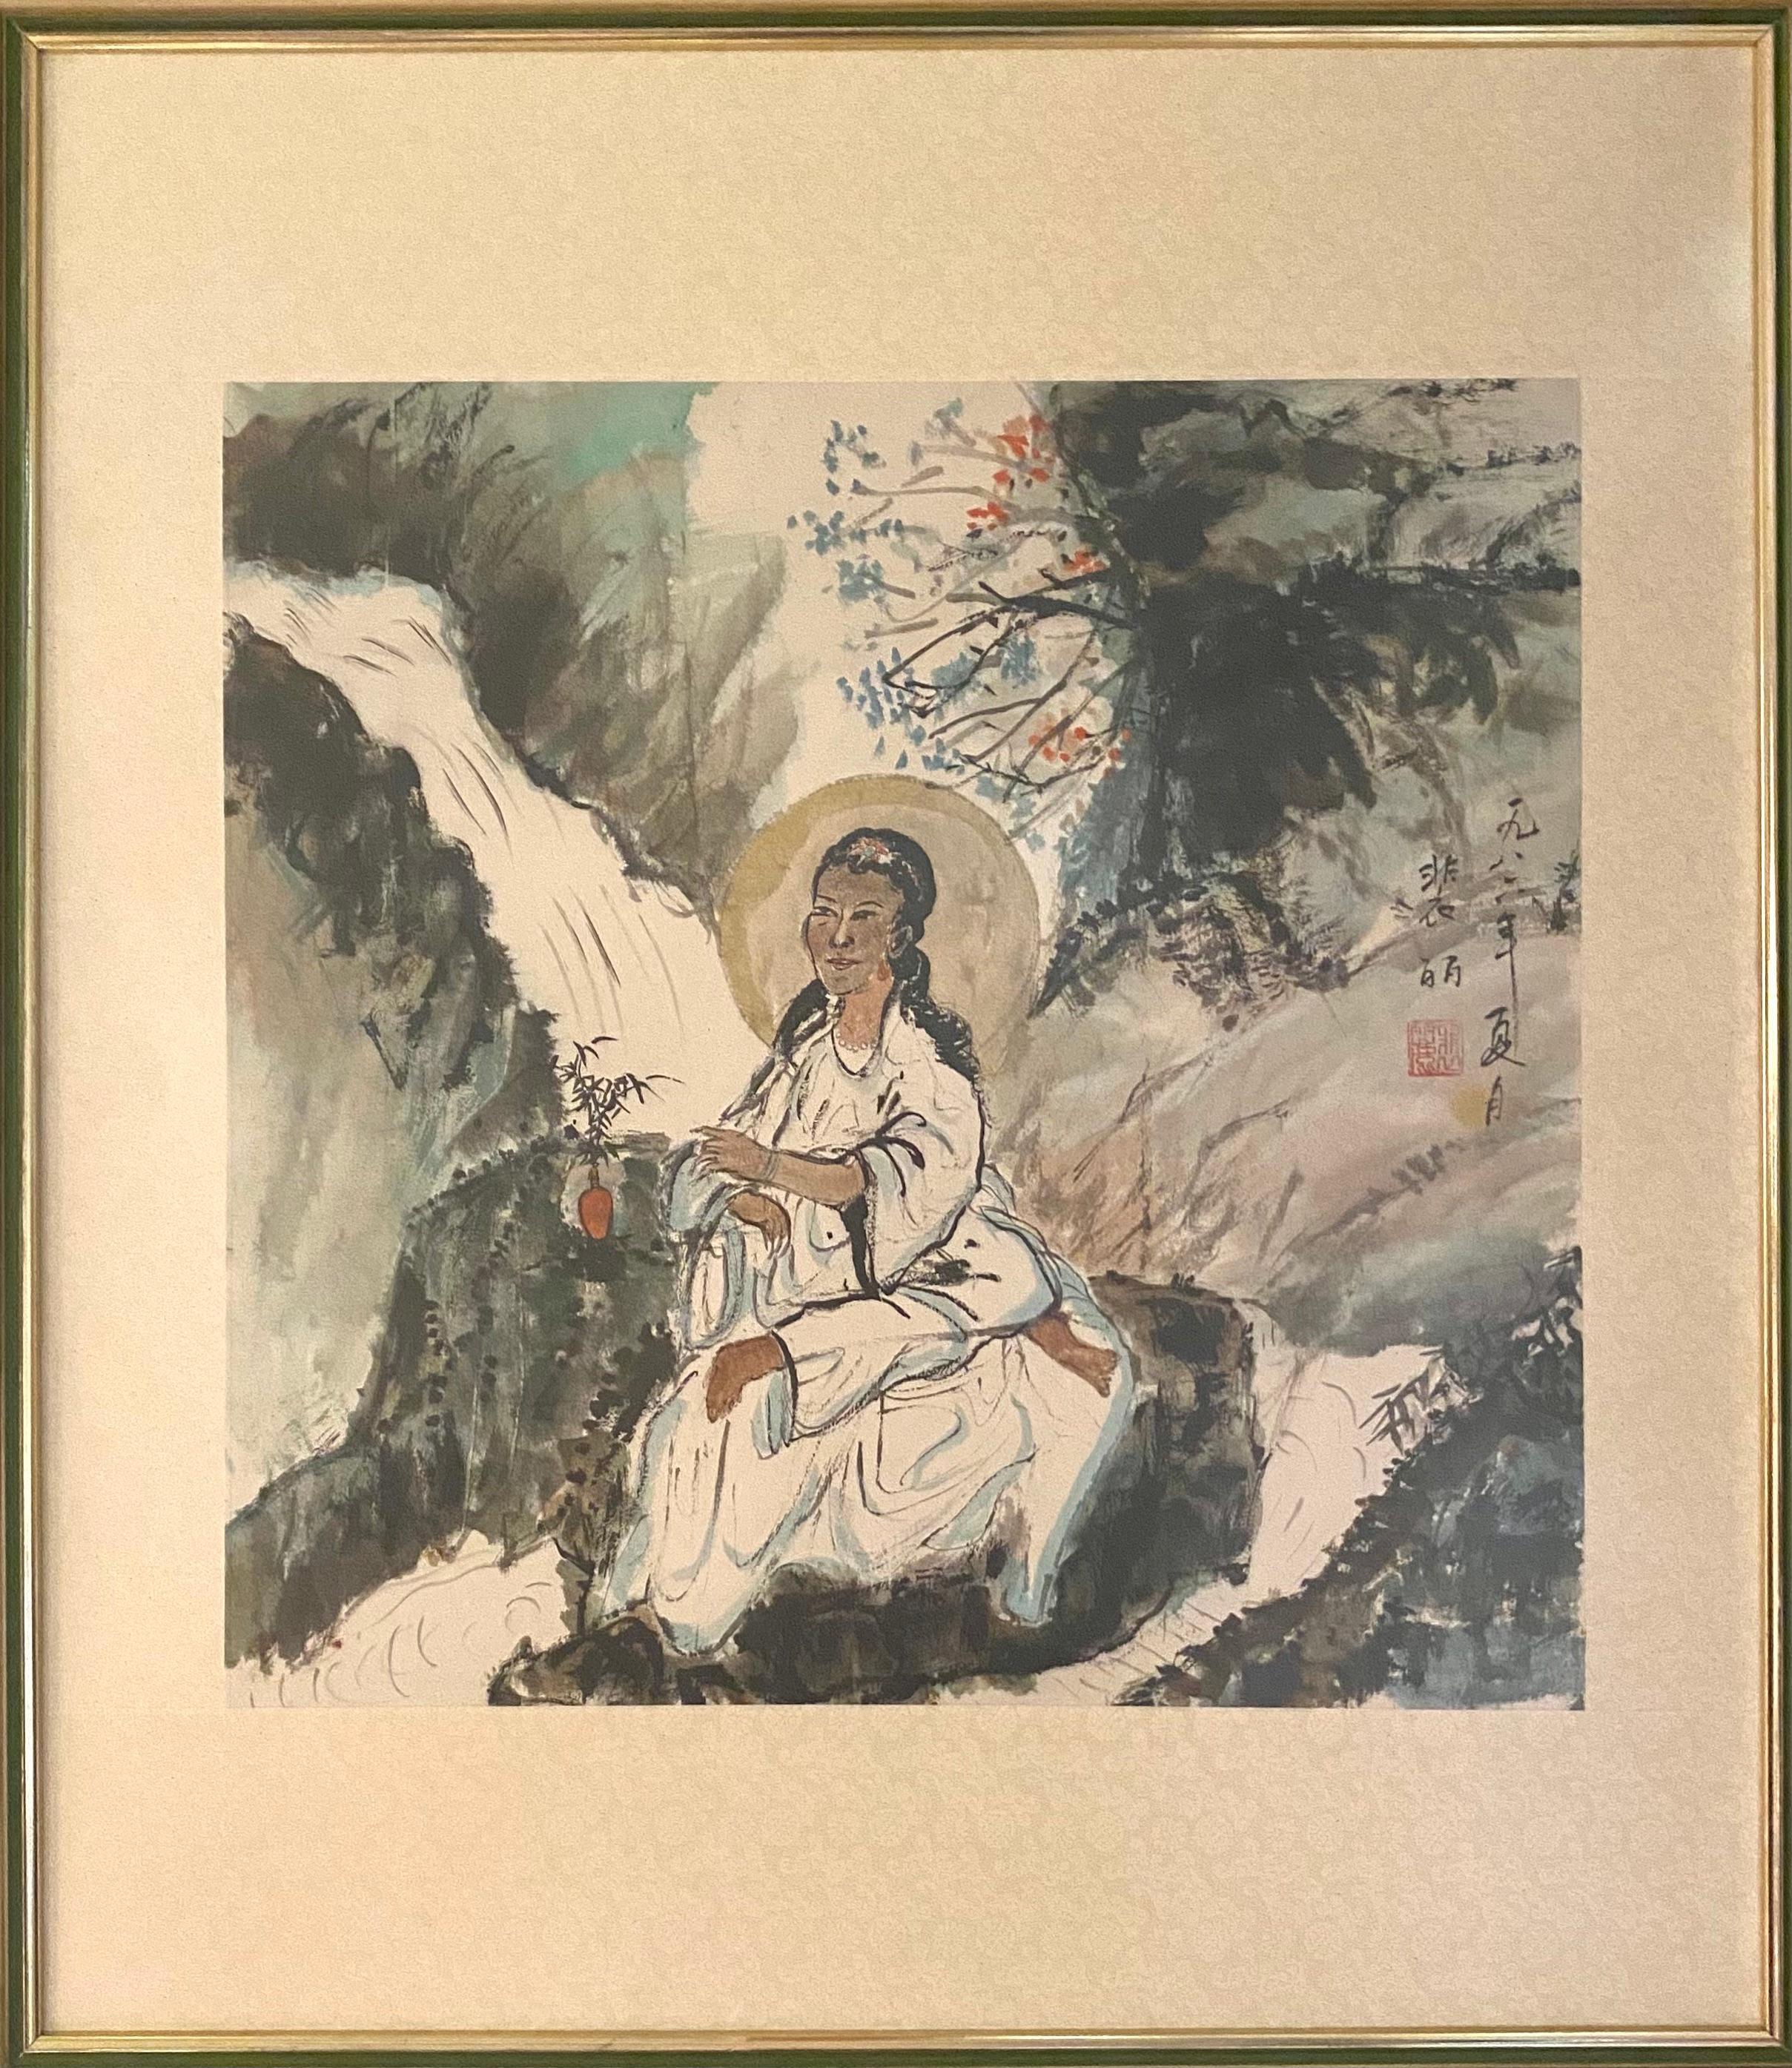 Goddess contemporary Chinese ink and brush painting by Fereshteh Stoecklein - Painting by Fereshteh Stoecklein 